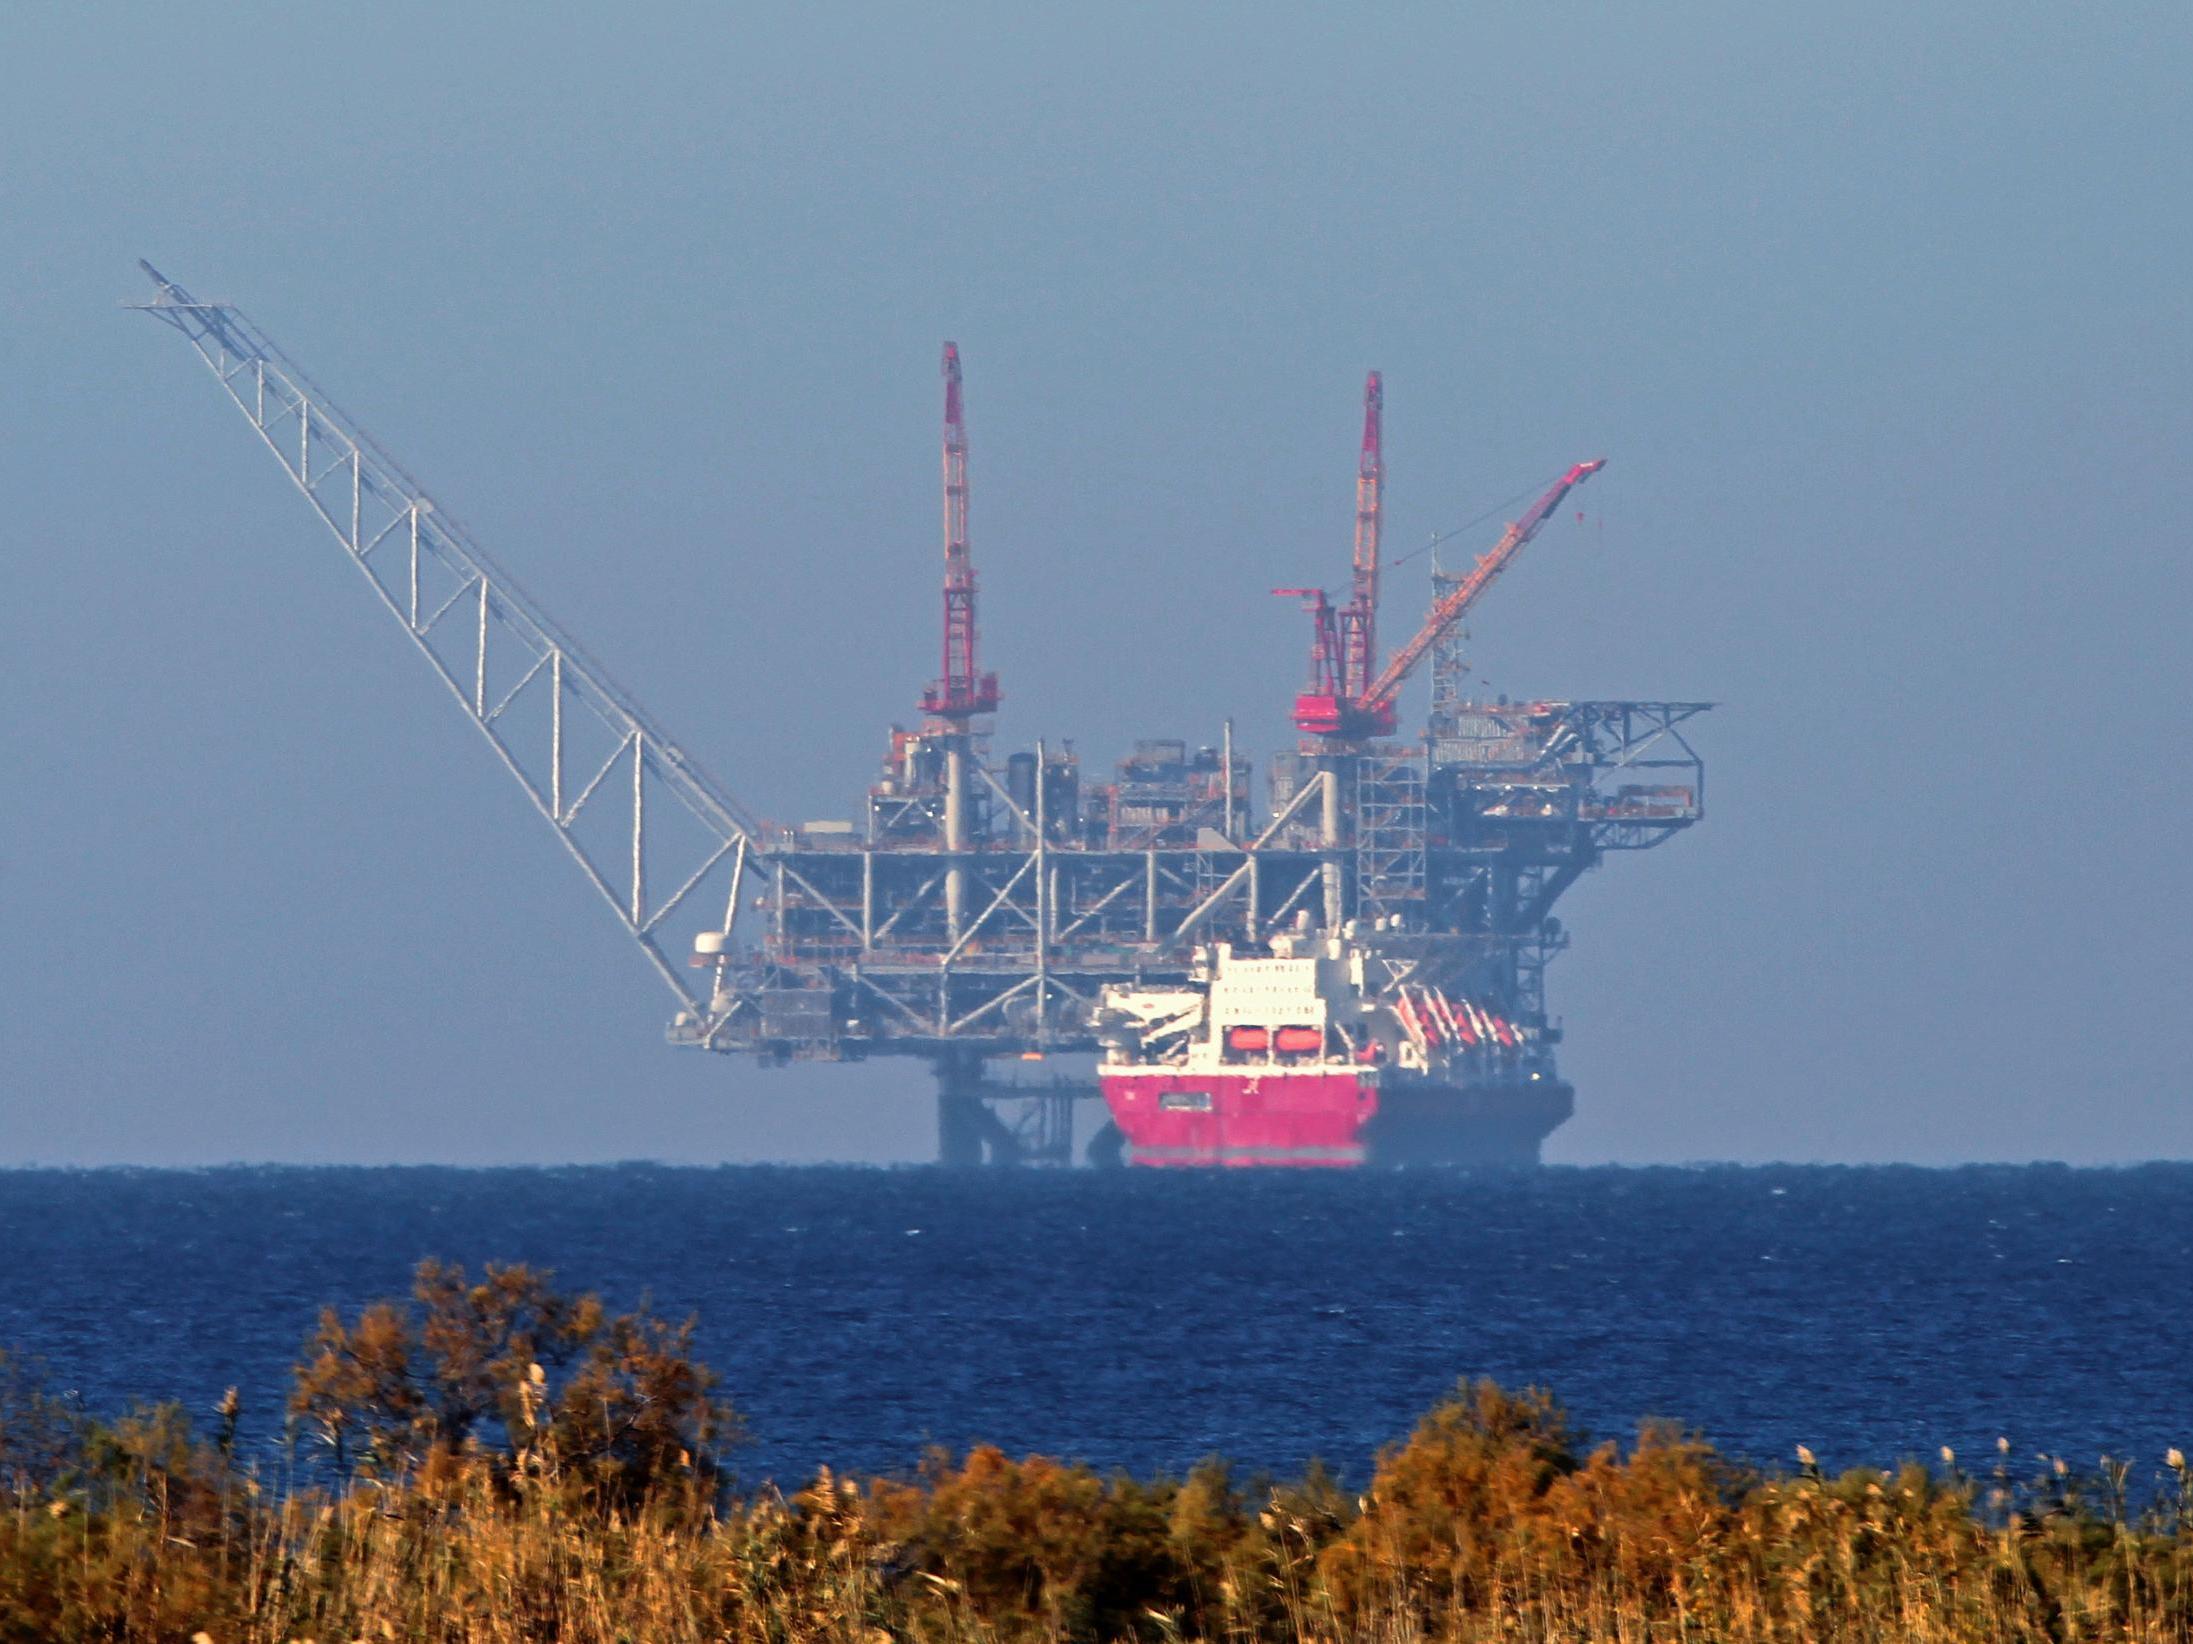 Israel's Leviathan natural gas field in the Mediterranean Sea, which began pumping gas just before the new year